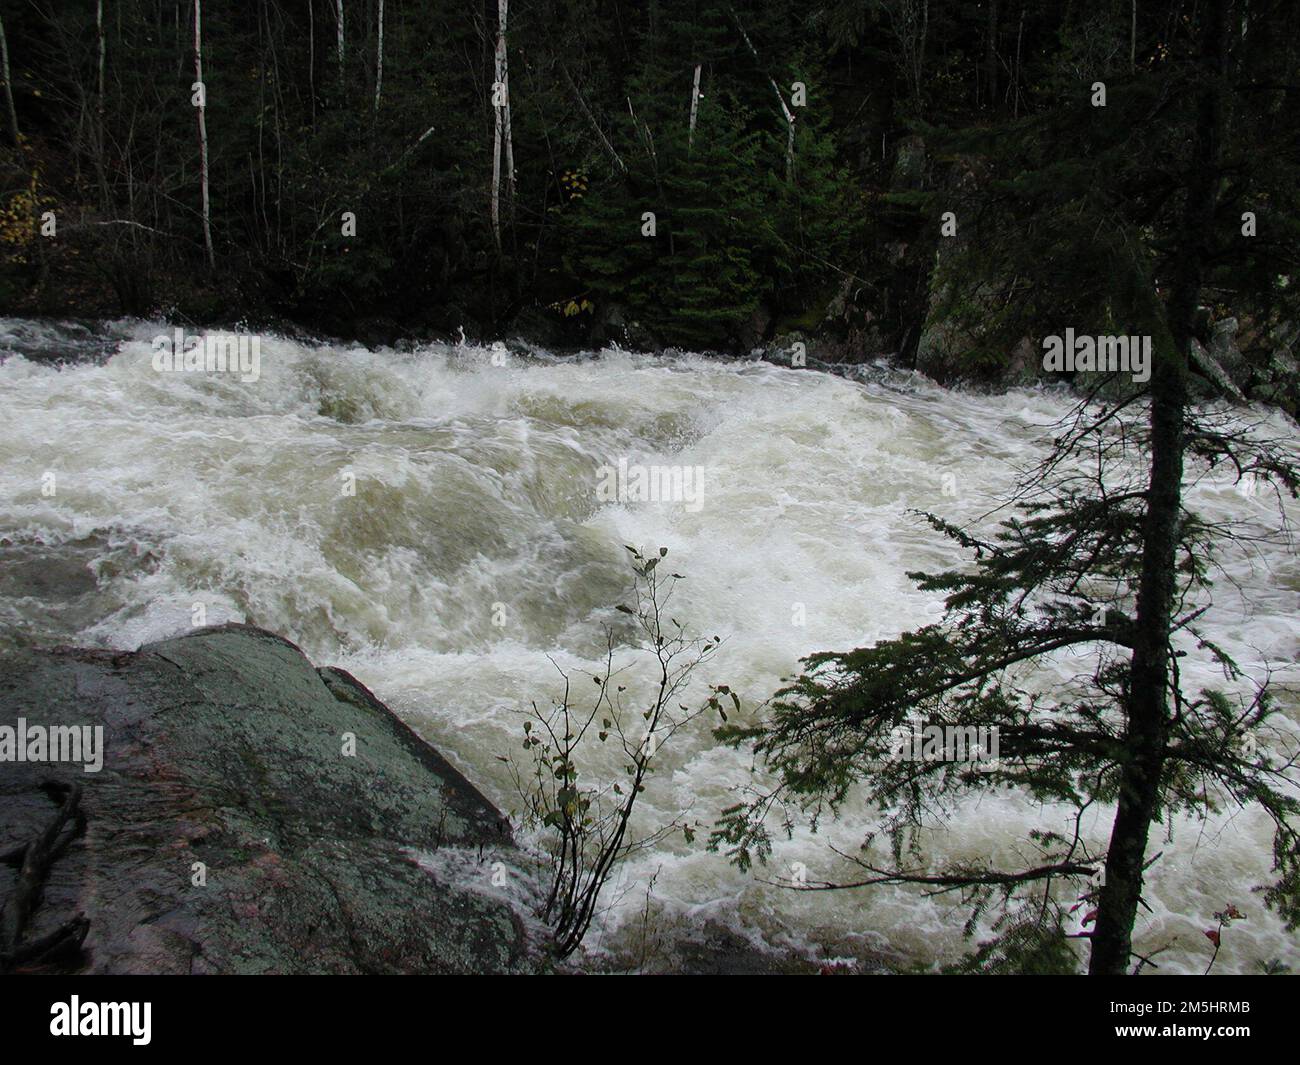 Gunflint Trail Scenic Byway - Seagull River at Trail's End Campground. Rapids rush along the Seagull River as it descends from Seagull Lake to Gull Lake. Seagull River, Trail's End Campground, Minnesota (47.988° N 90.349° W) Stock Photo